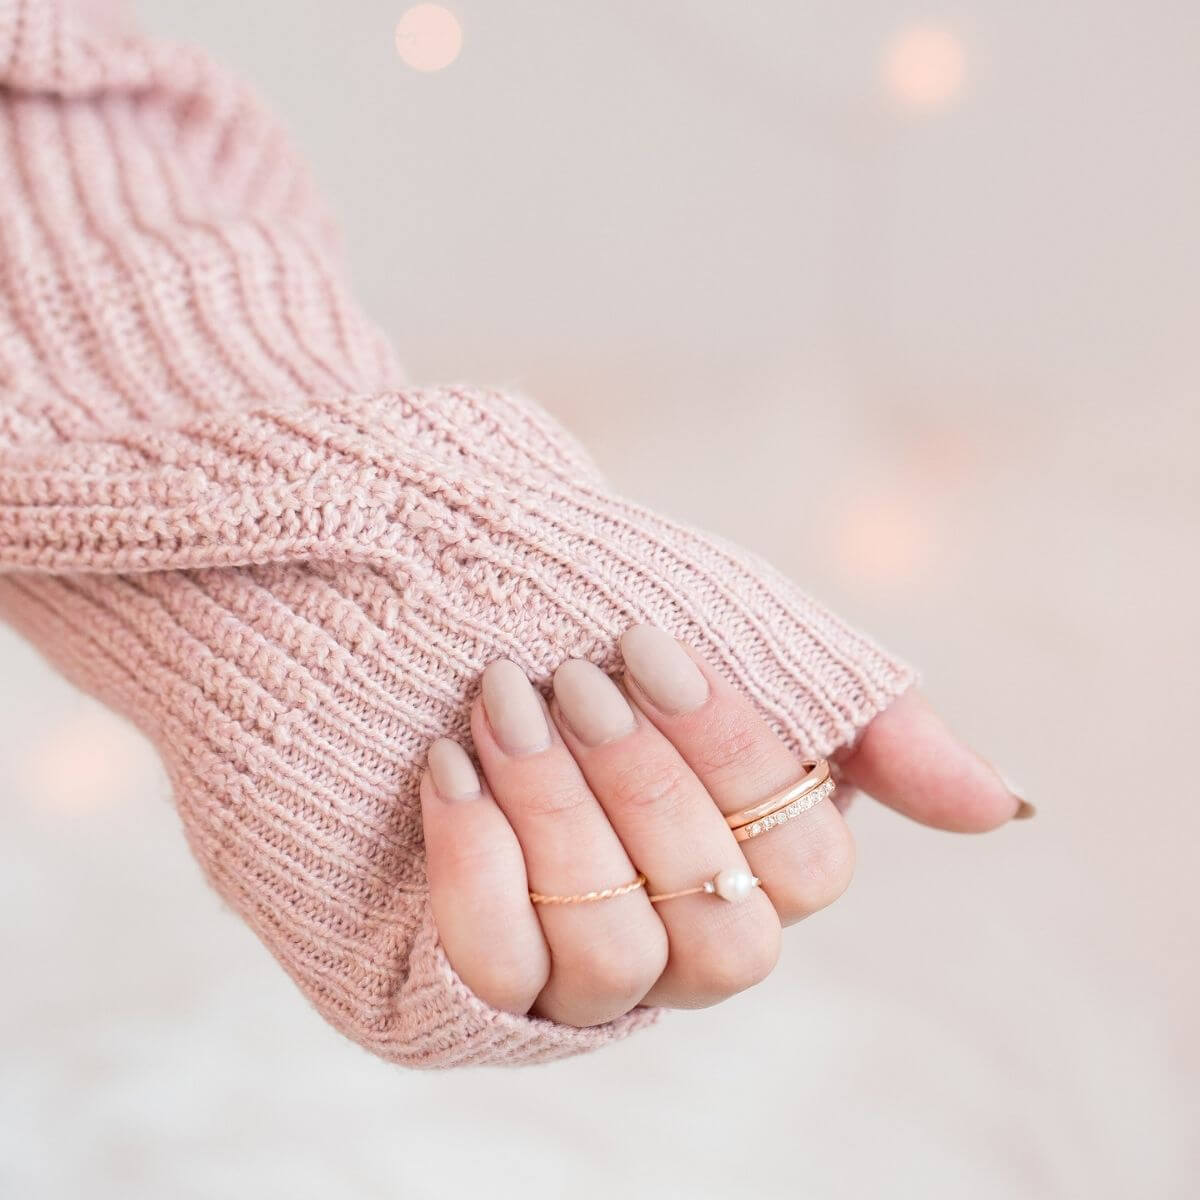 A close-up photo of a person's hands partially covered by a pink, knitted sleeve. The visible hand has neatly manicured nails painted in a soft, matte nude polish. On the ring finger, there's a delicate, simple gold band, and on the middle finger, there's a thin gold ring with a small pearl. The overall feel of the image is cozy and gentle, with a bokeh effect creating soft light circles in the background, suggesting a warm, tranquil environment.